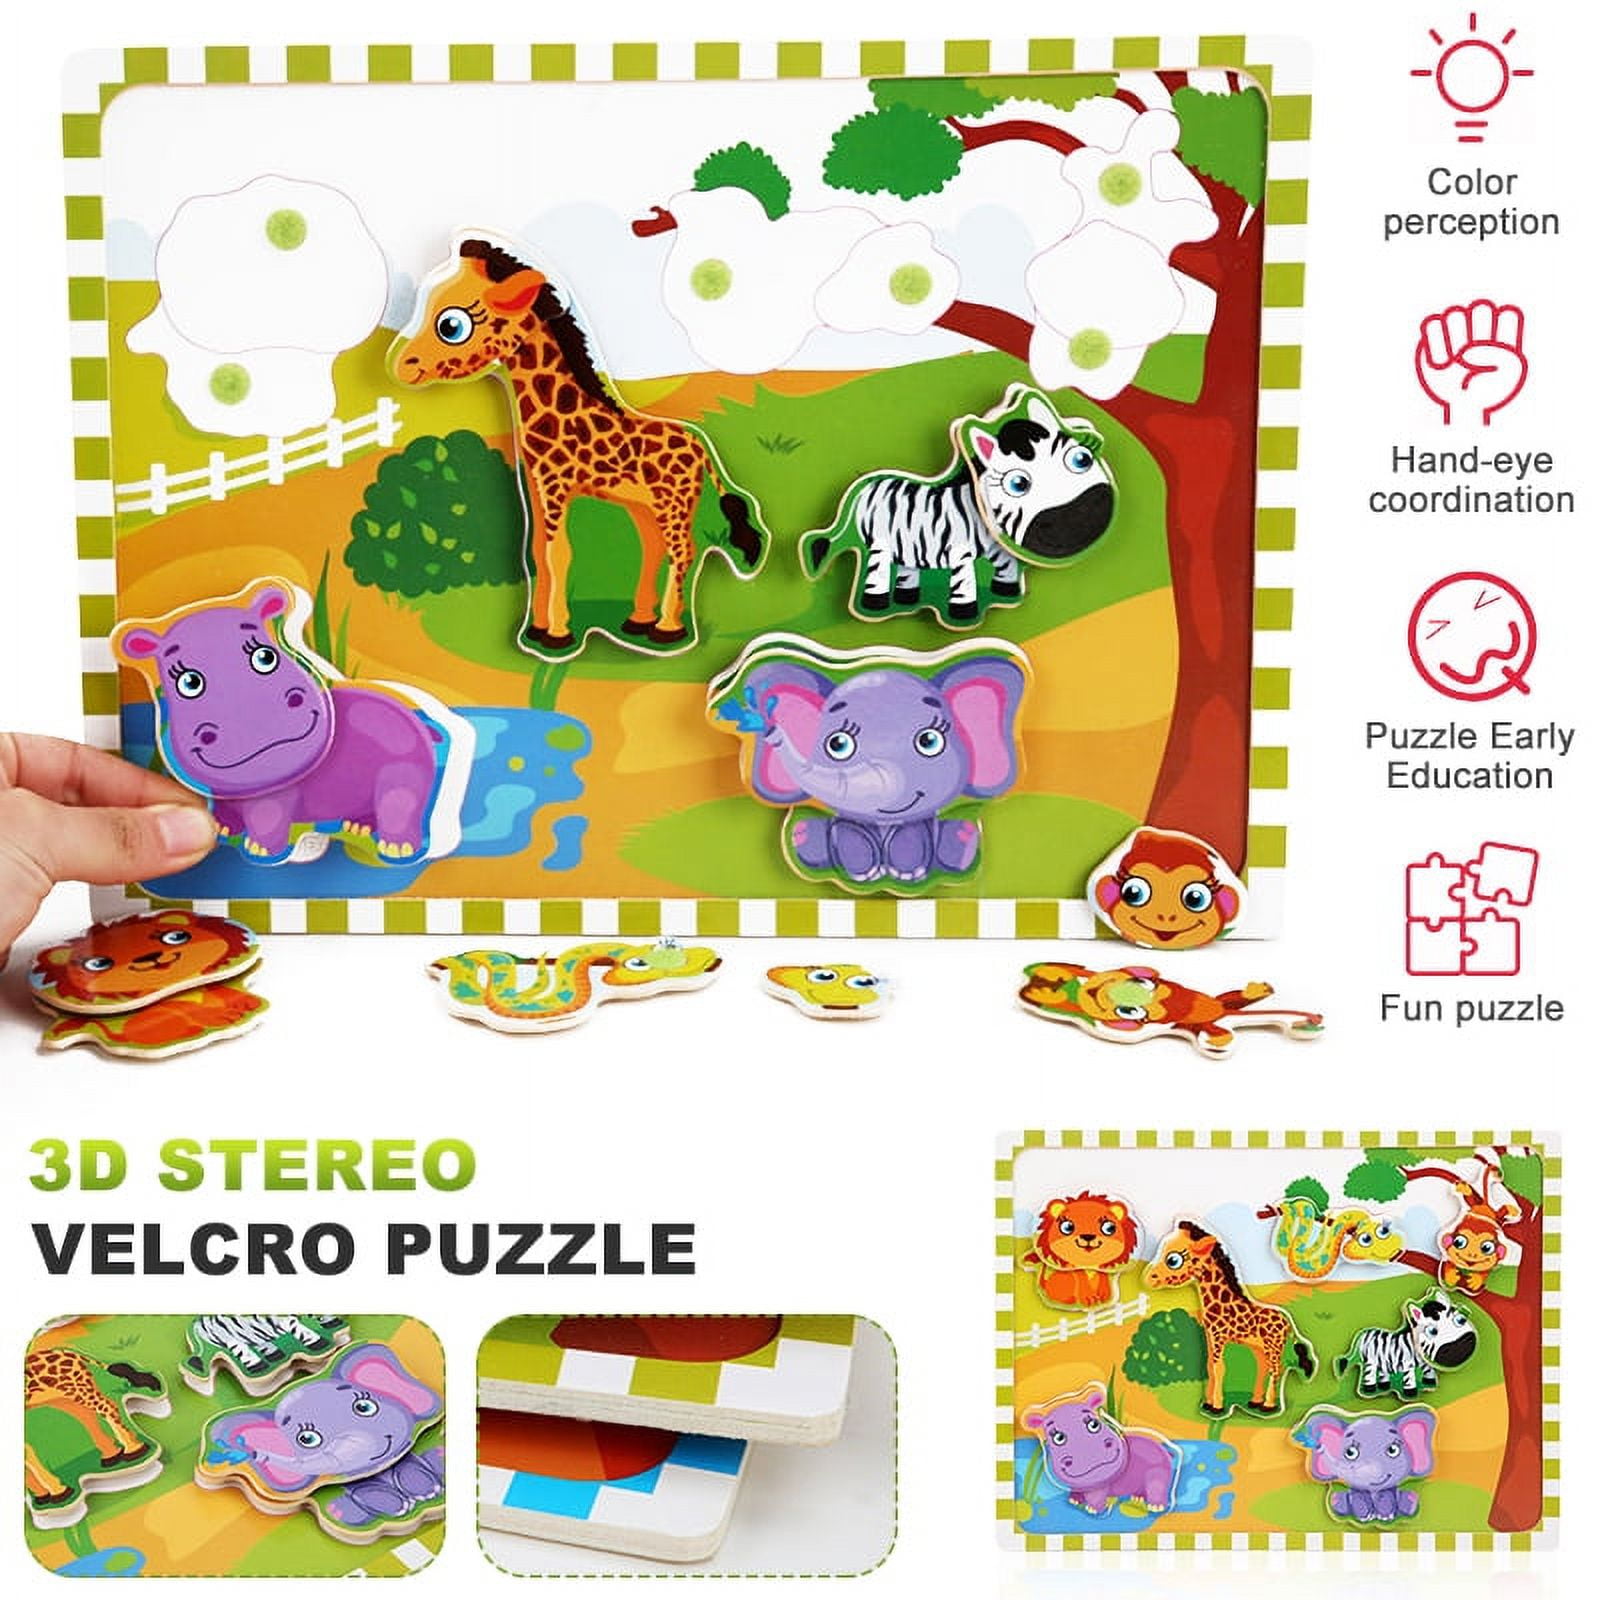 Dinosaur Jigsaw Puzzles - Dino Puzzle Game for Kids & Toddlers for Nintendo  Switch - Nintendo Official Site